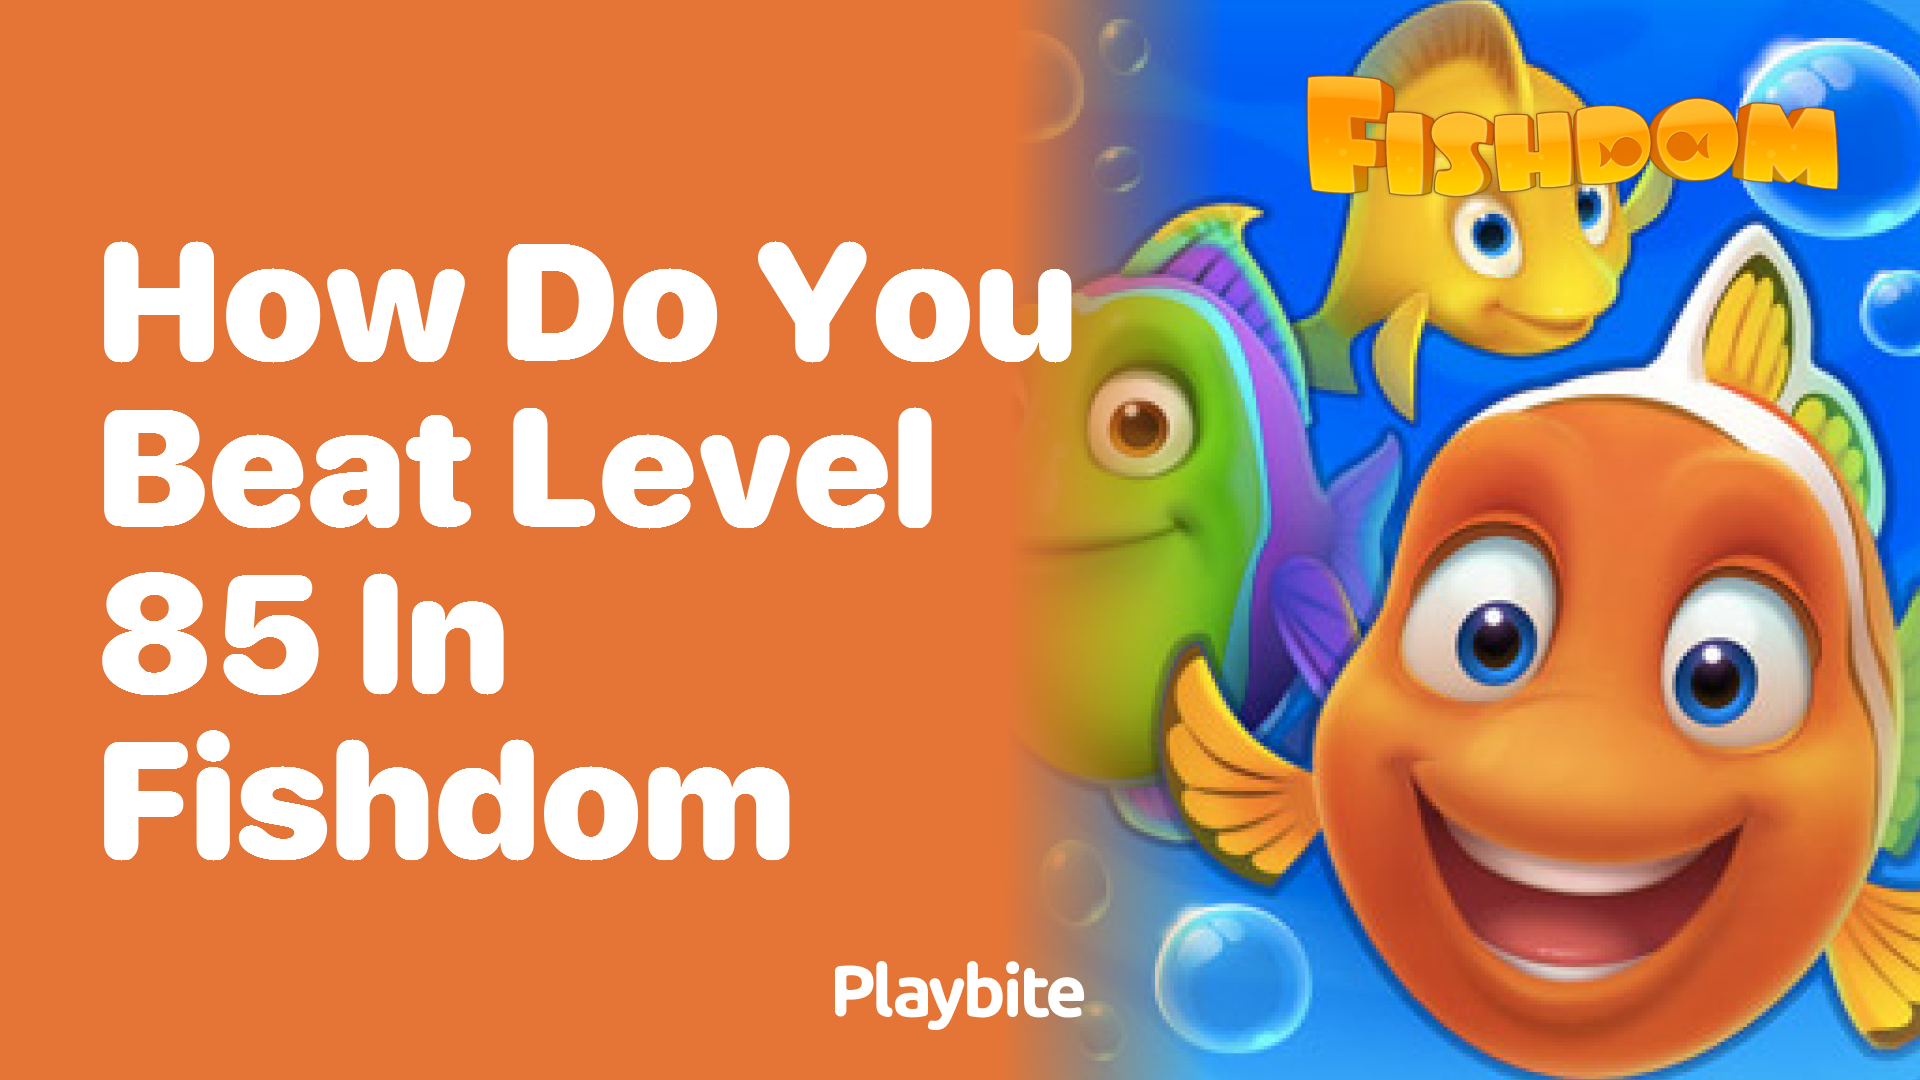 How do you beat level 85 in Fishdom?